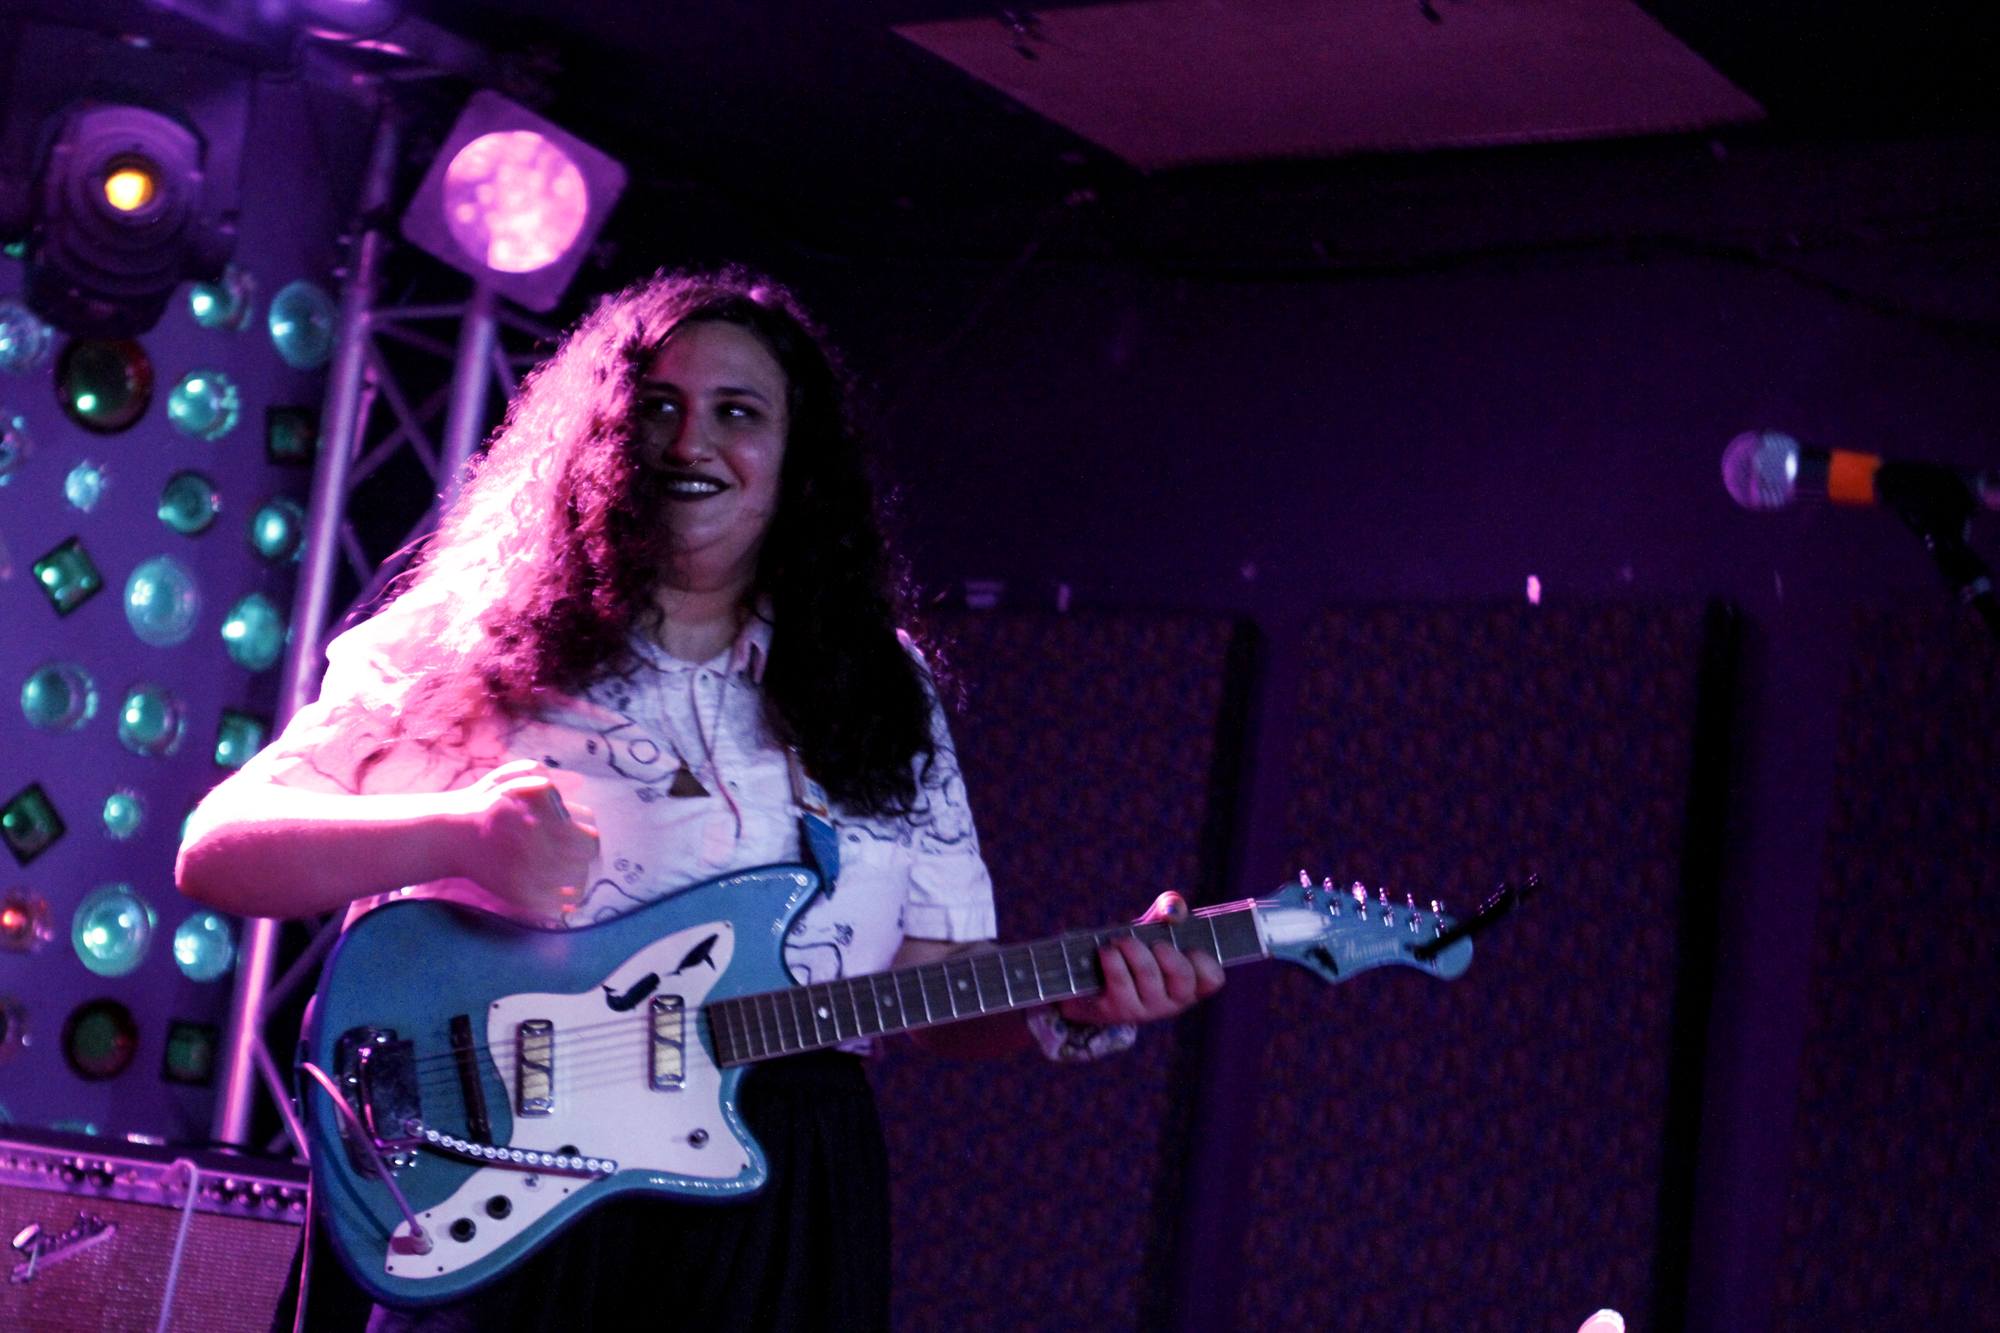 Palehound plays at Baby's All Right in Williamsburg, Brooklyn, New York on June. 27, 2017. (© Michael Katzif - Do not use or republish without prior consent.)